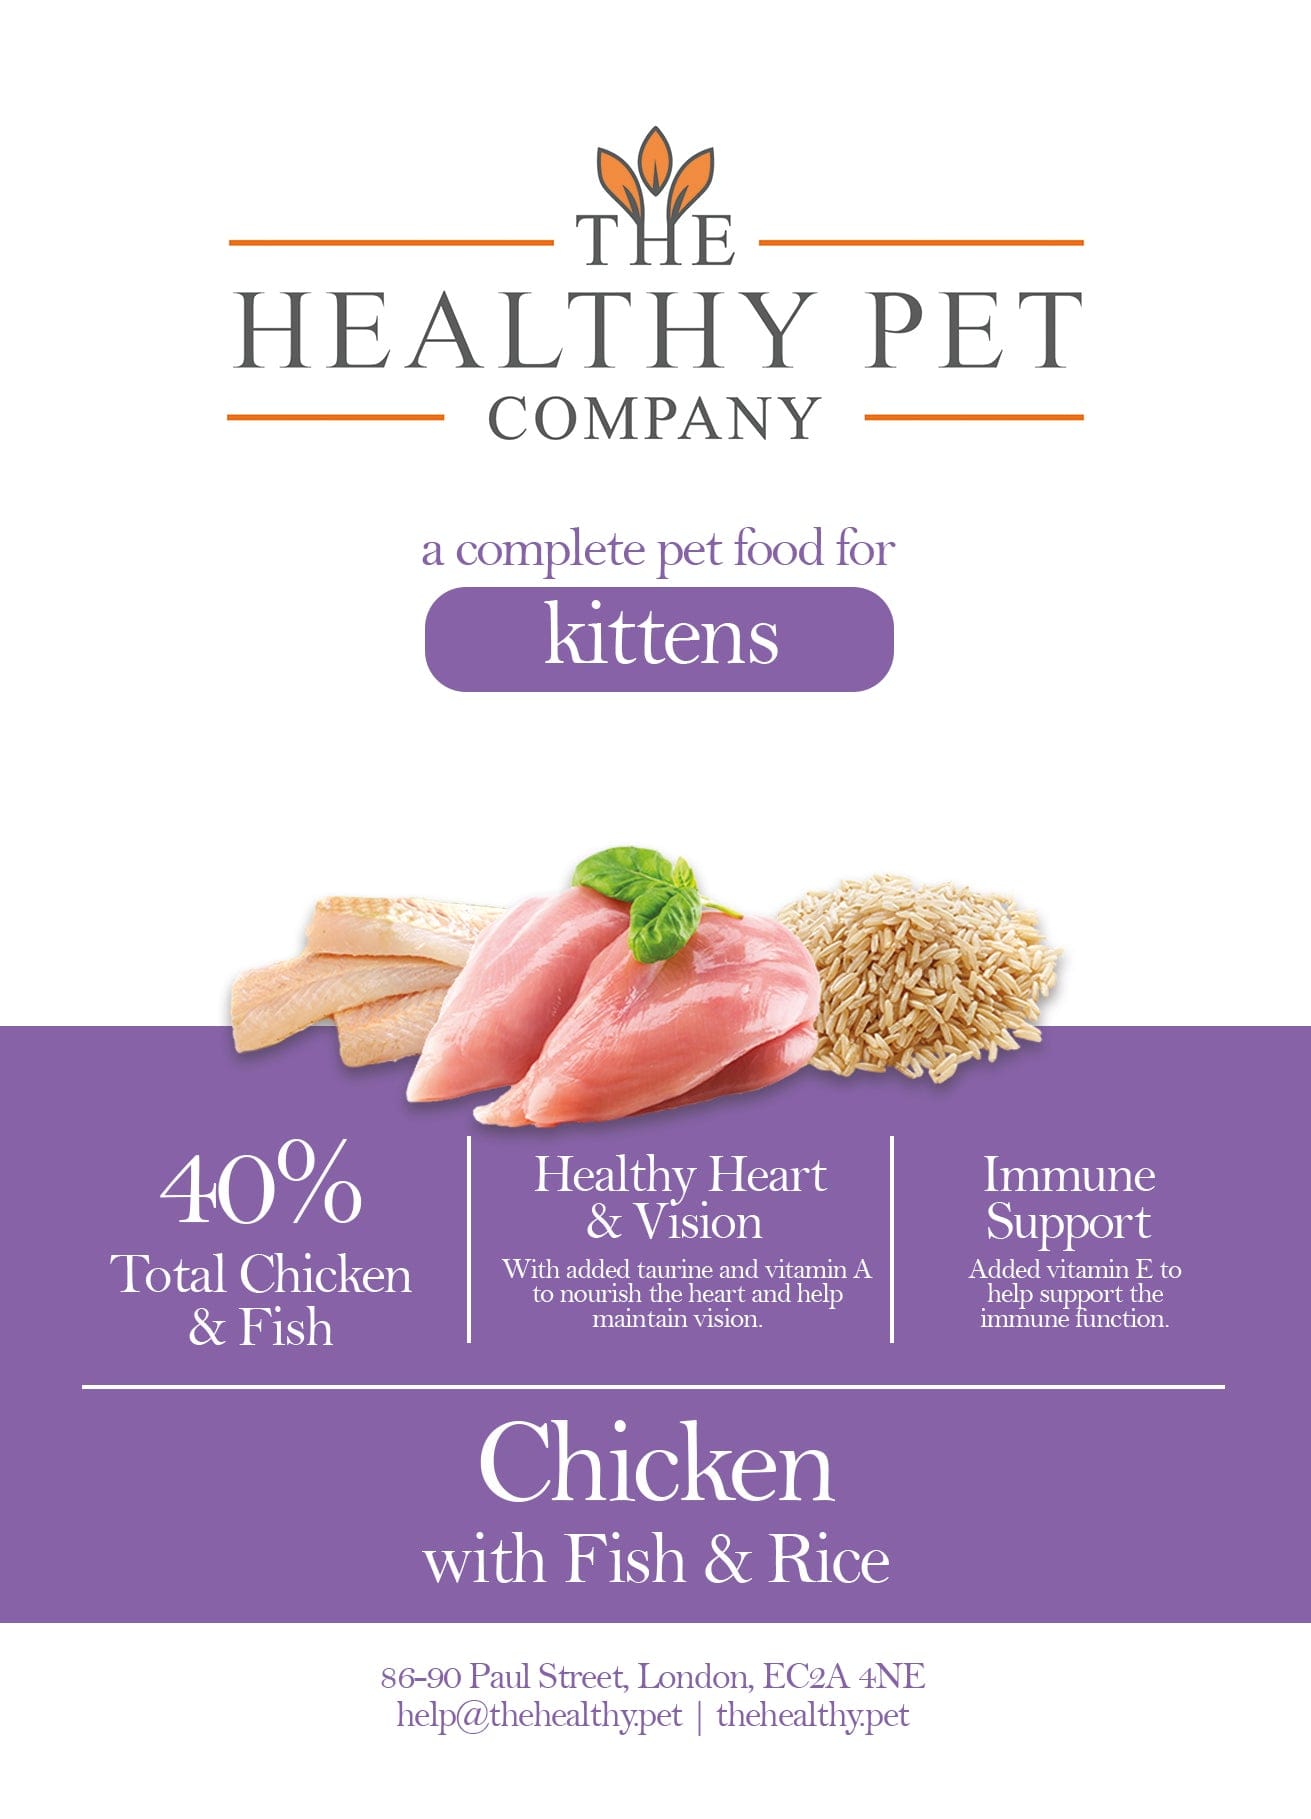 The Healthy Pet Company Complete Meal - Chicken with Fish and Rice for Kittens - The Healthy Pet Company